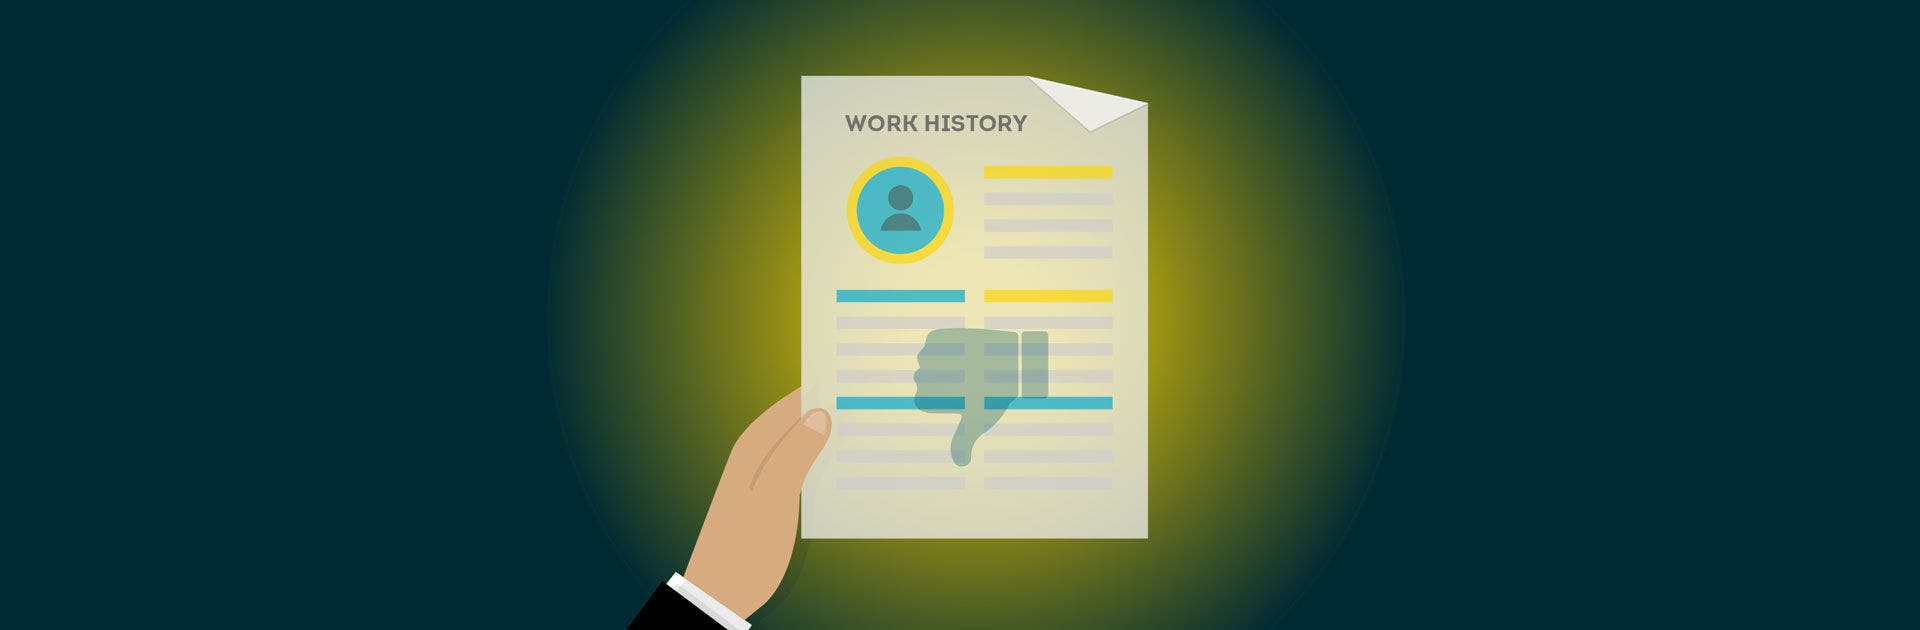 How to verify a rental applicant's work history